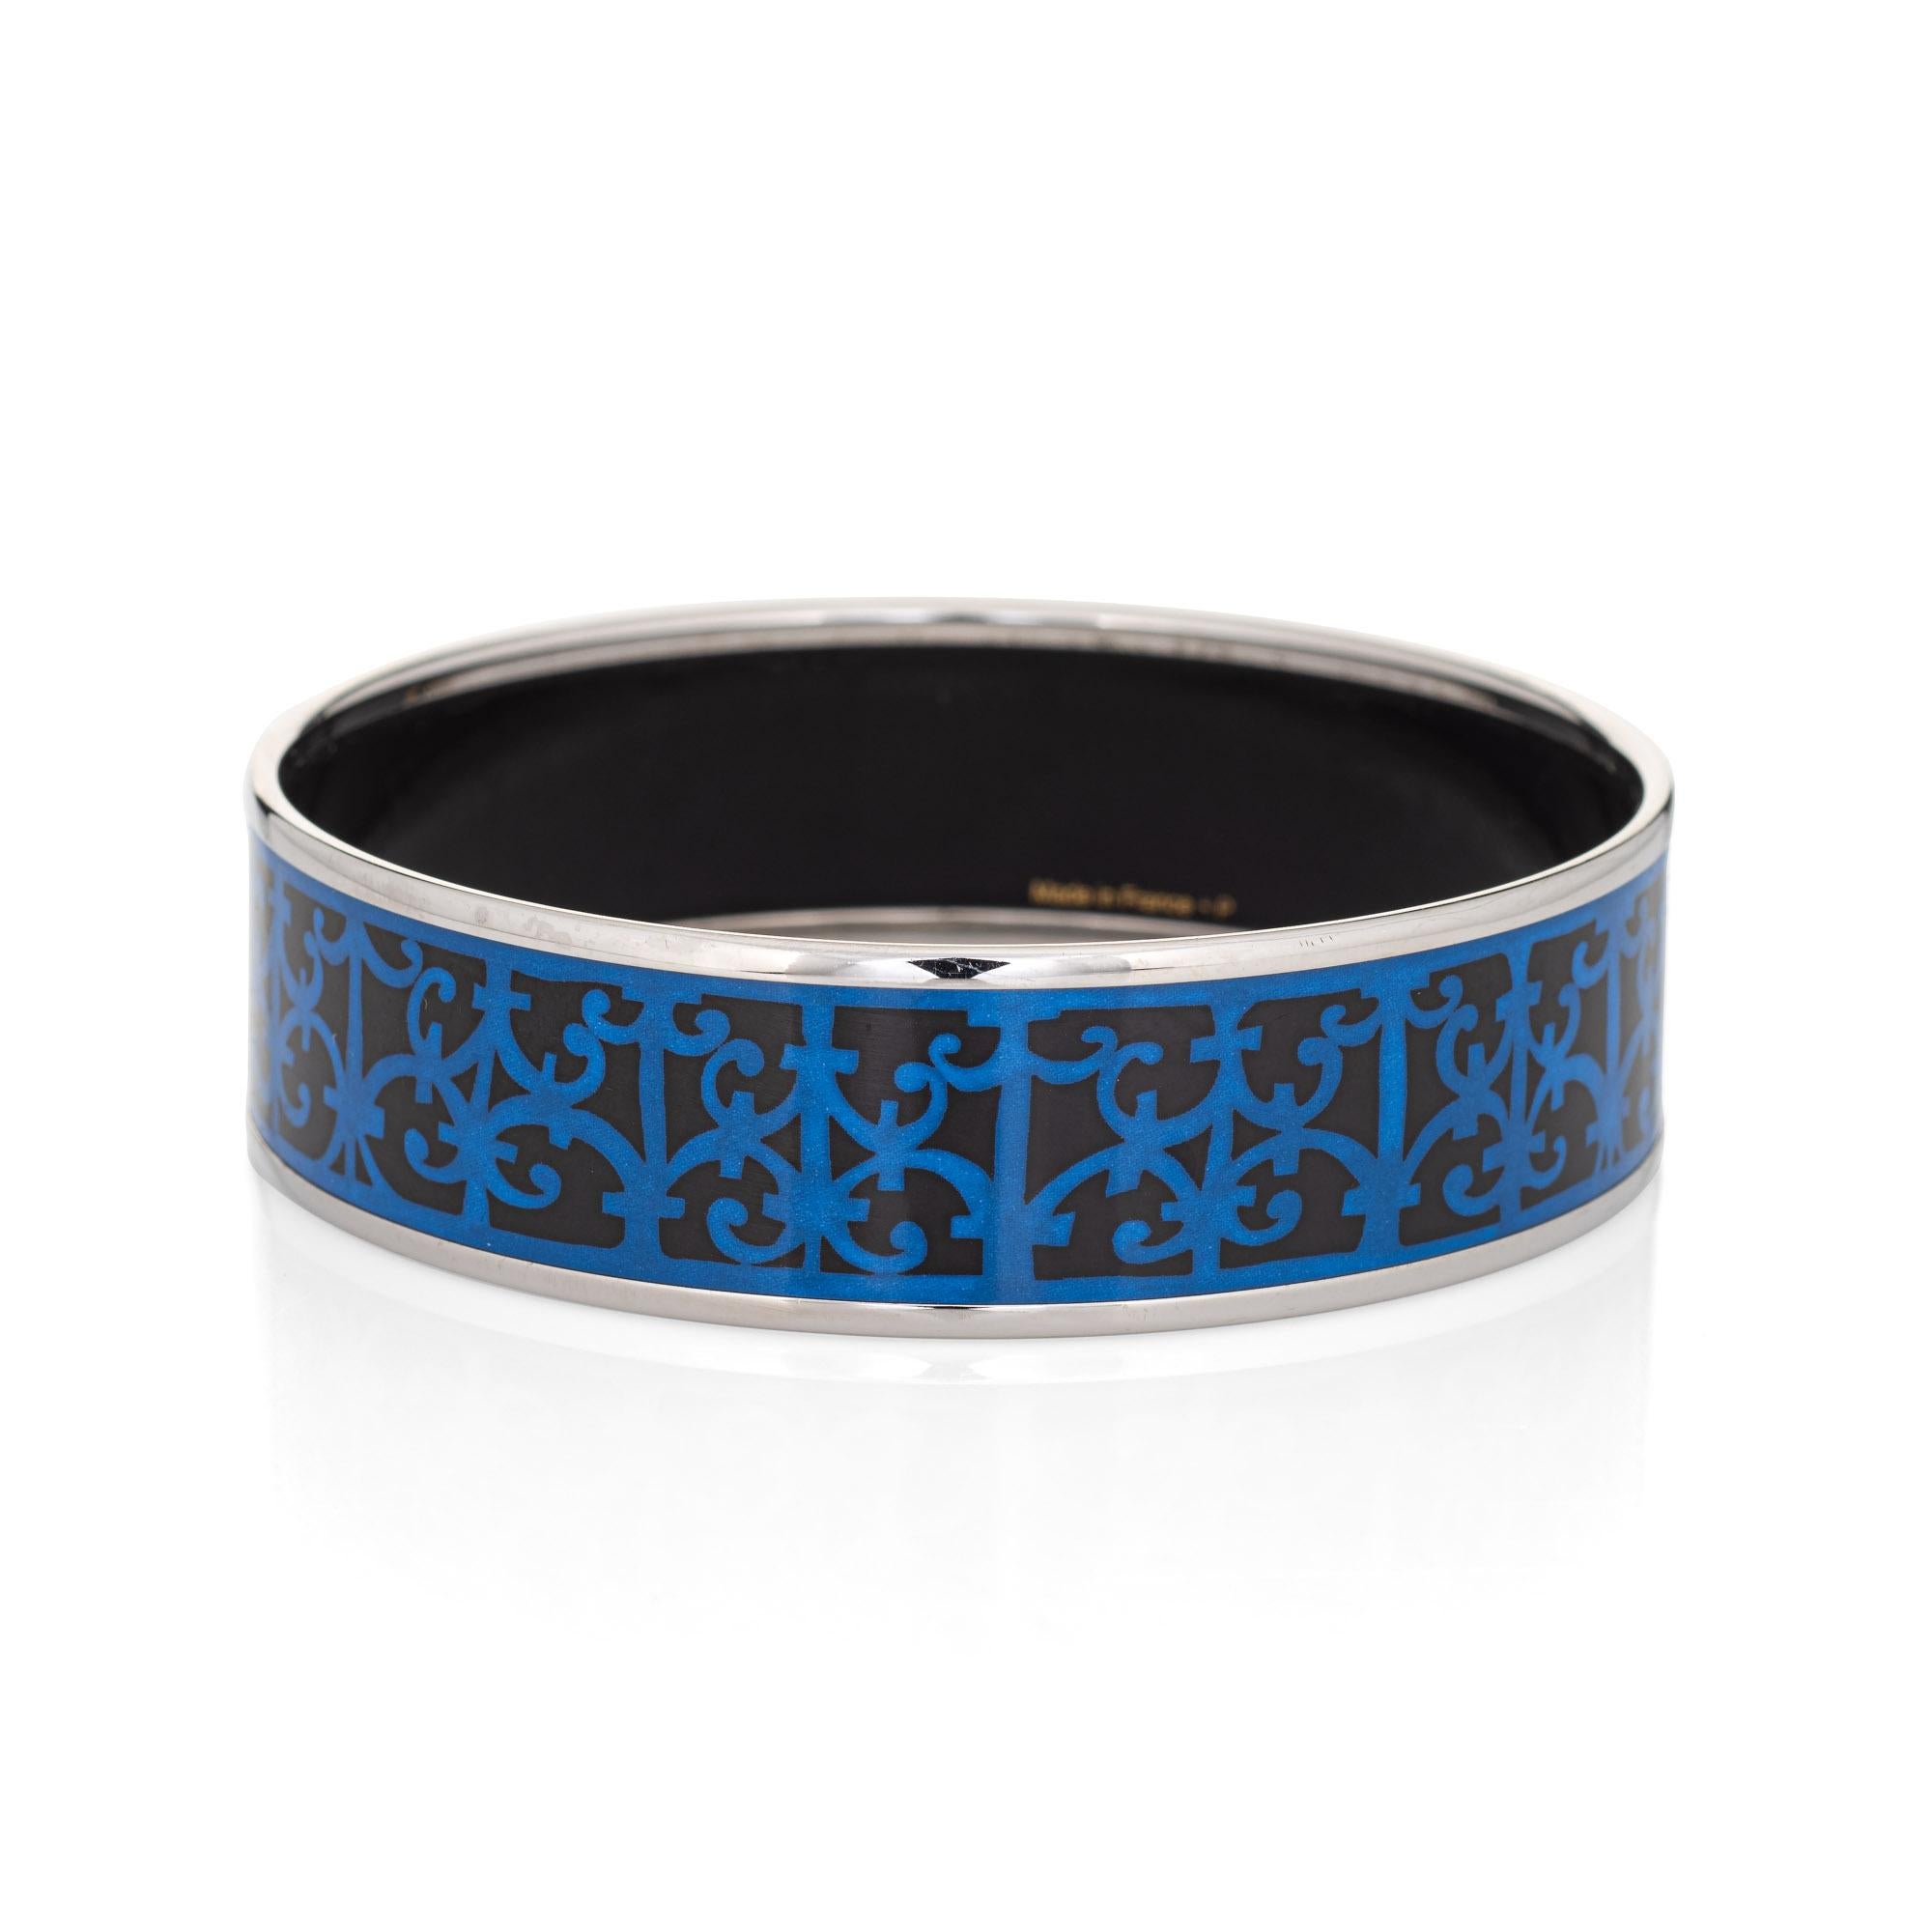 Overview:

Pre-owned vintage Hermes enamel bracelet with a black and blue pattern and palladium-plated hardware.

The wide 0.79